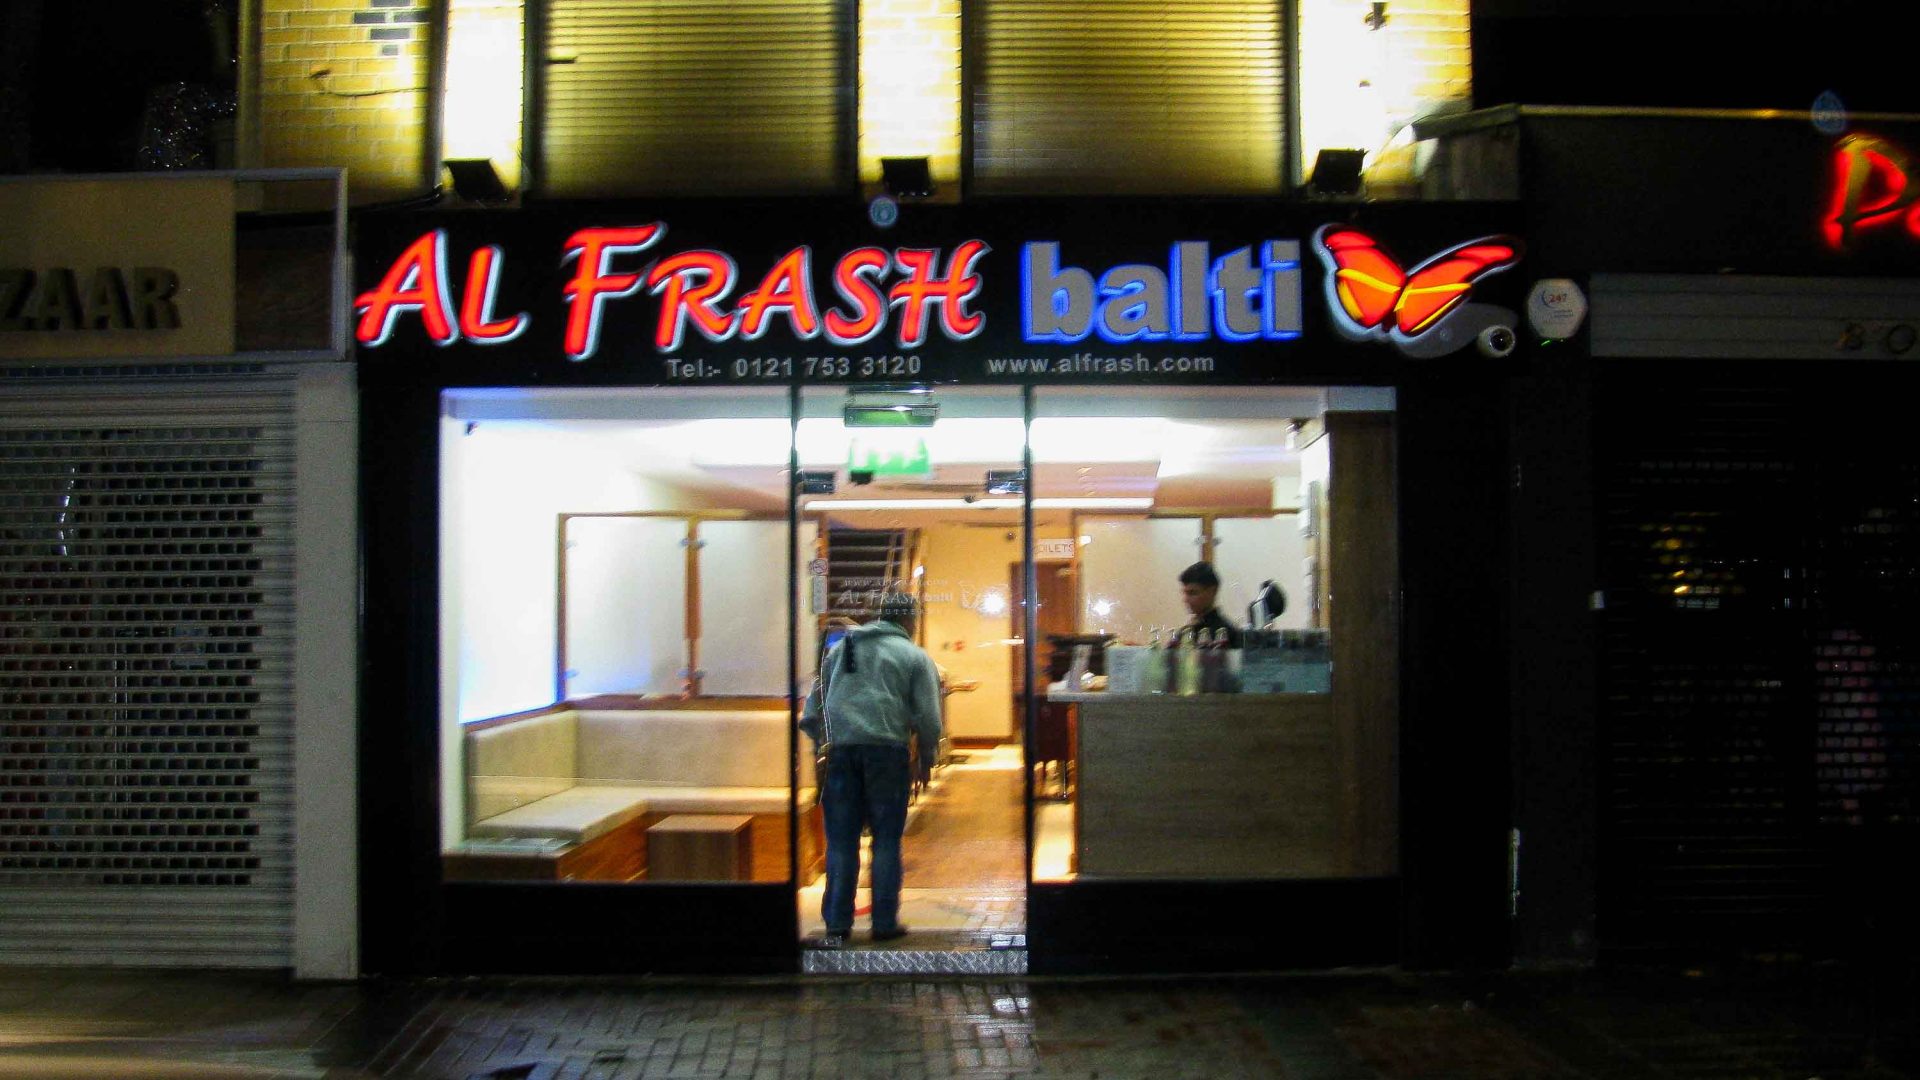 A shop front at night that sells Balti.